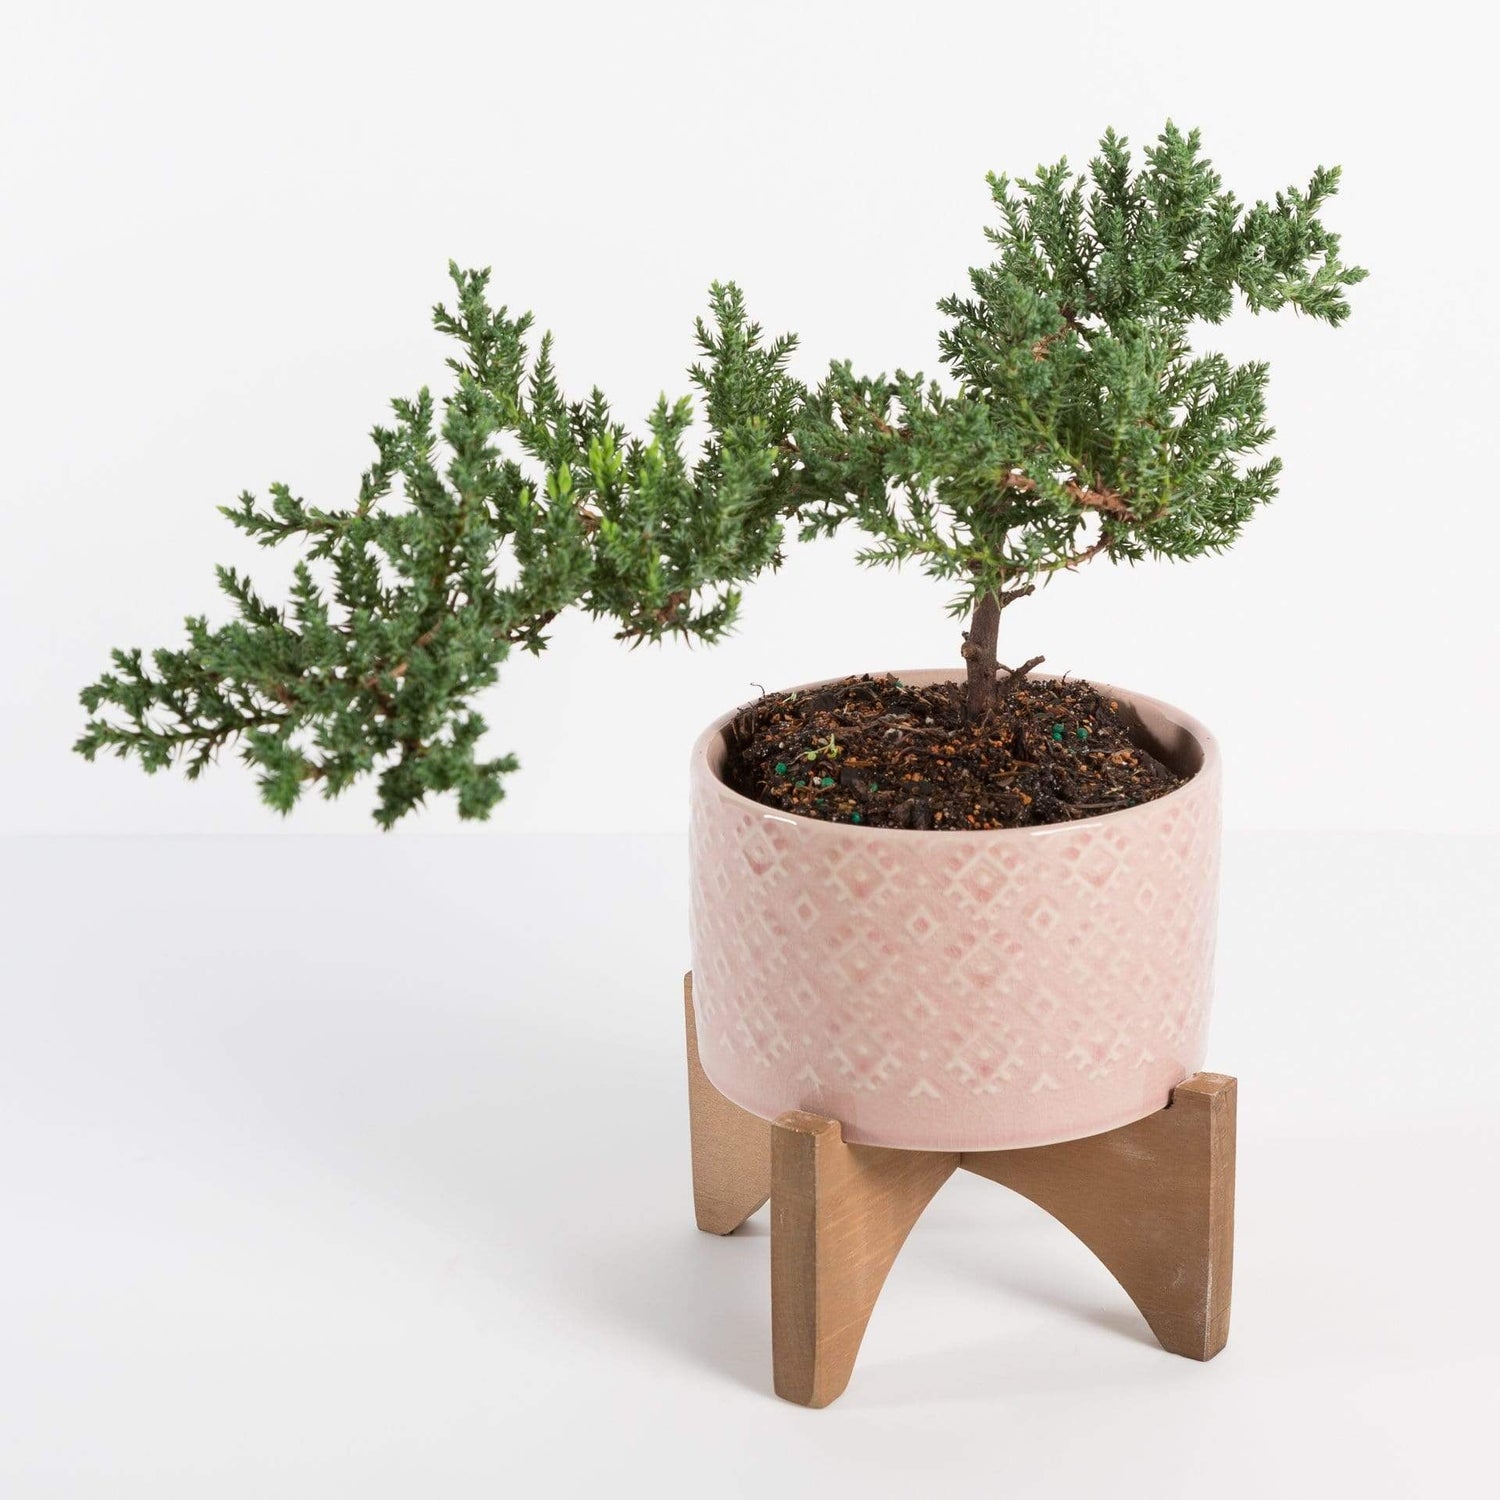 Urban Sprouts Plant 4" in nursery pot (5-7 years old) Bonsai 'Juniper'